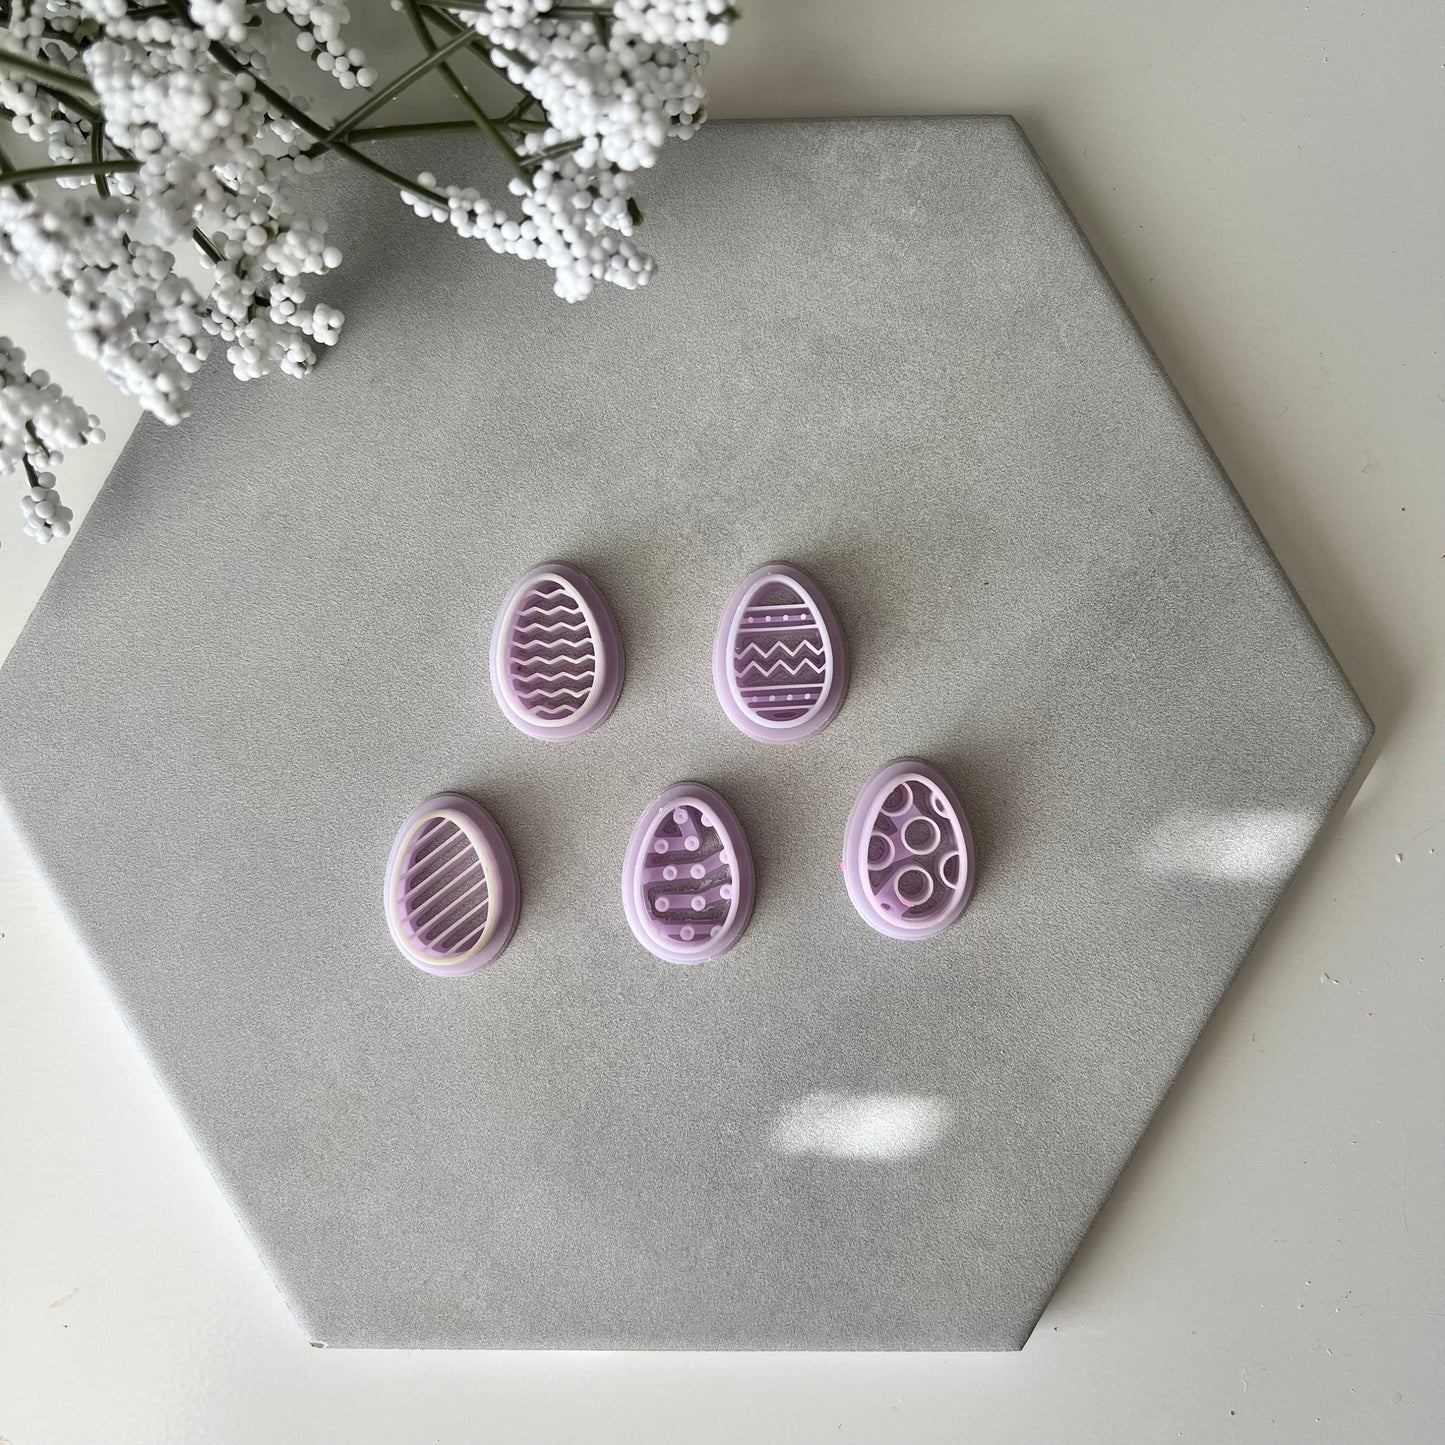 Embossed Easter Egg Cutters | 0.75"-1.25" | Polymer Clay Cutter Earrings Easter Spring